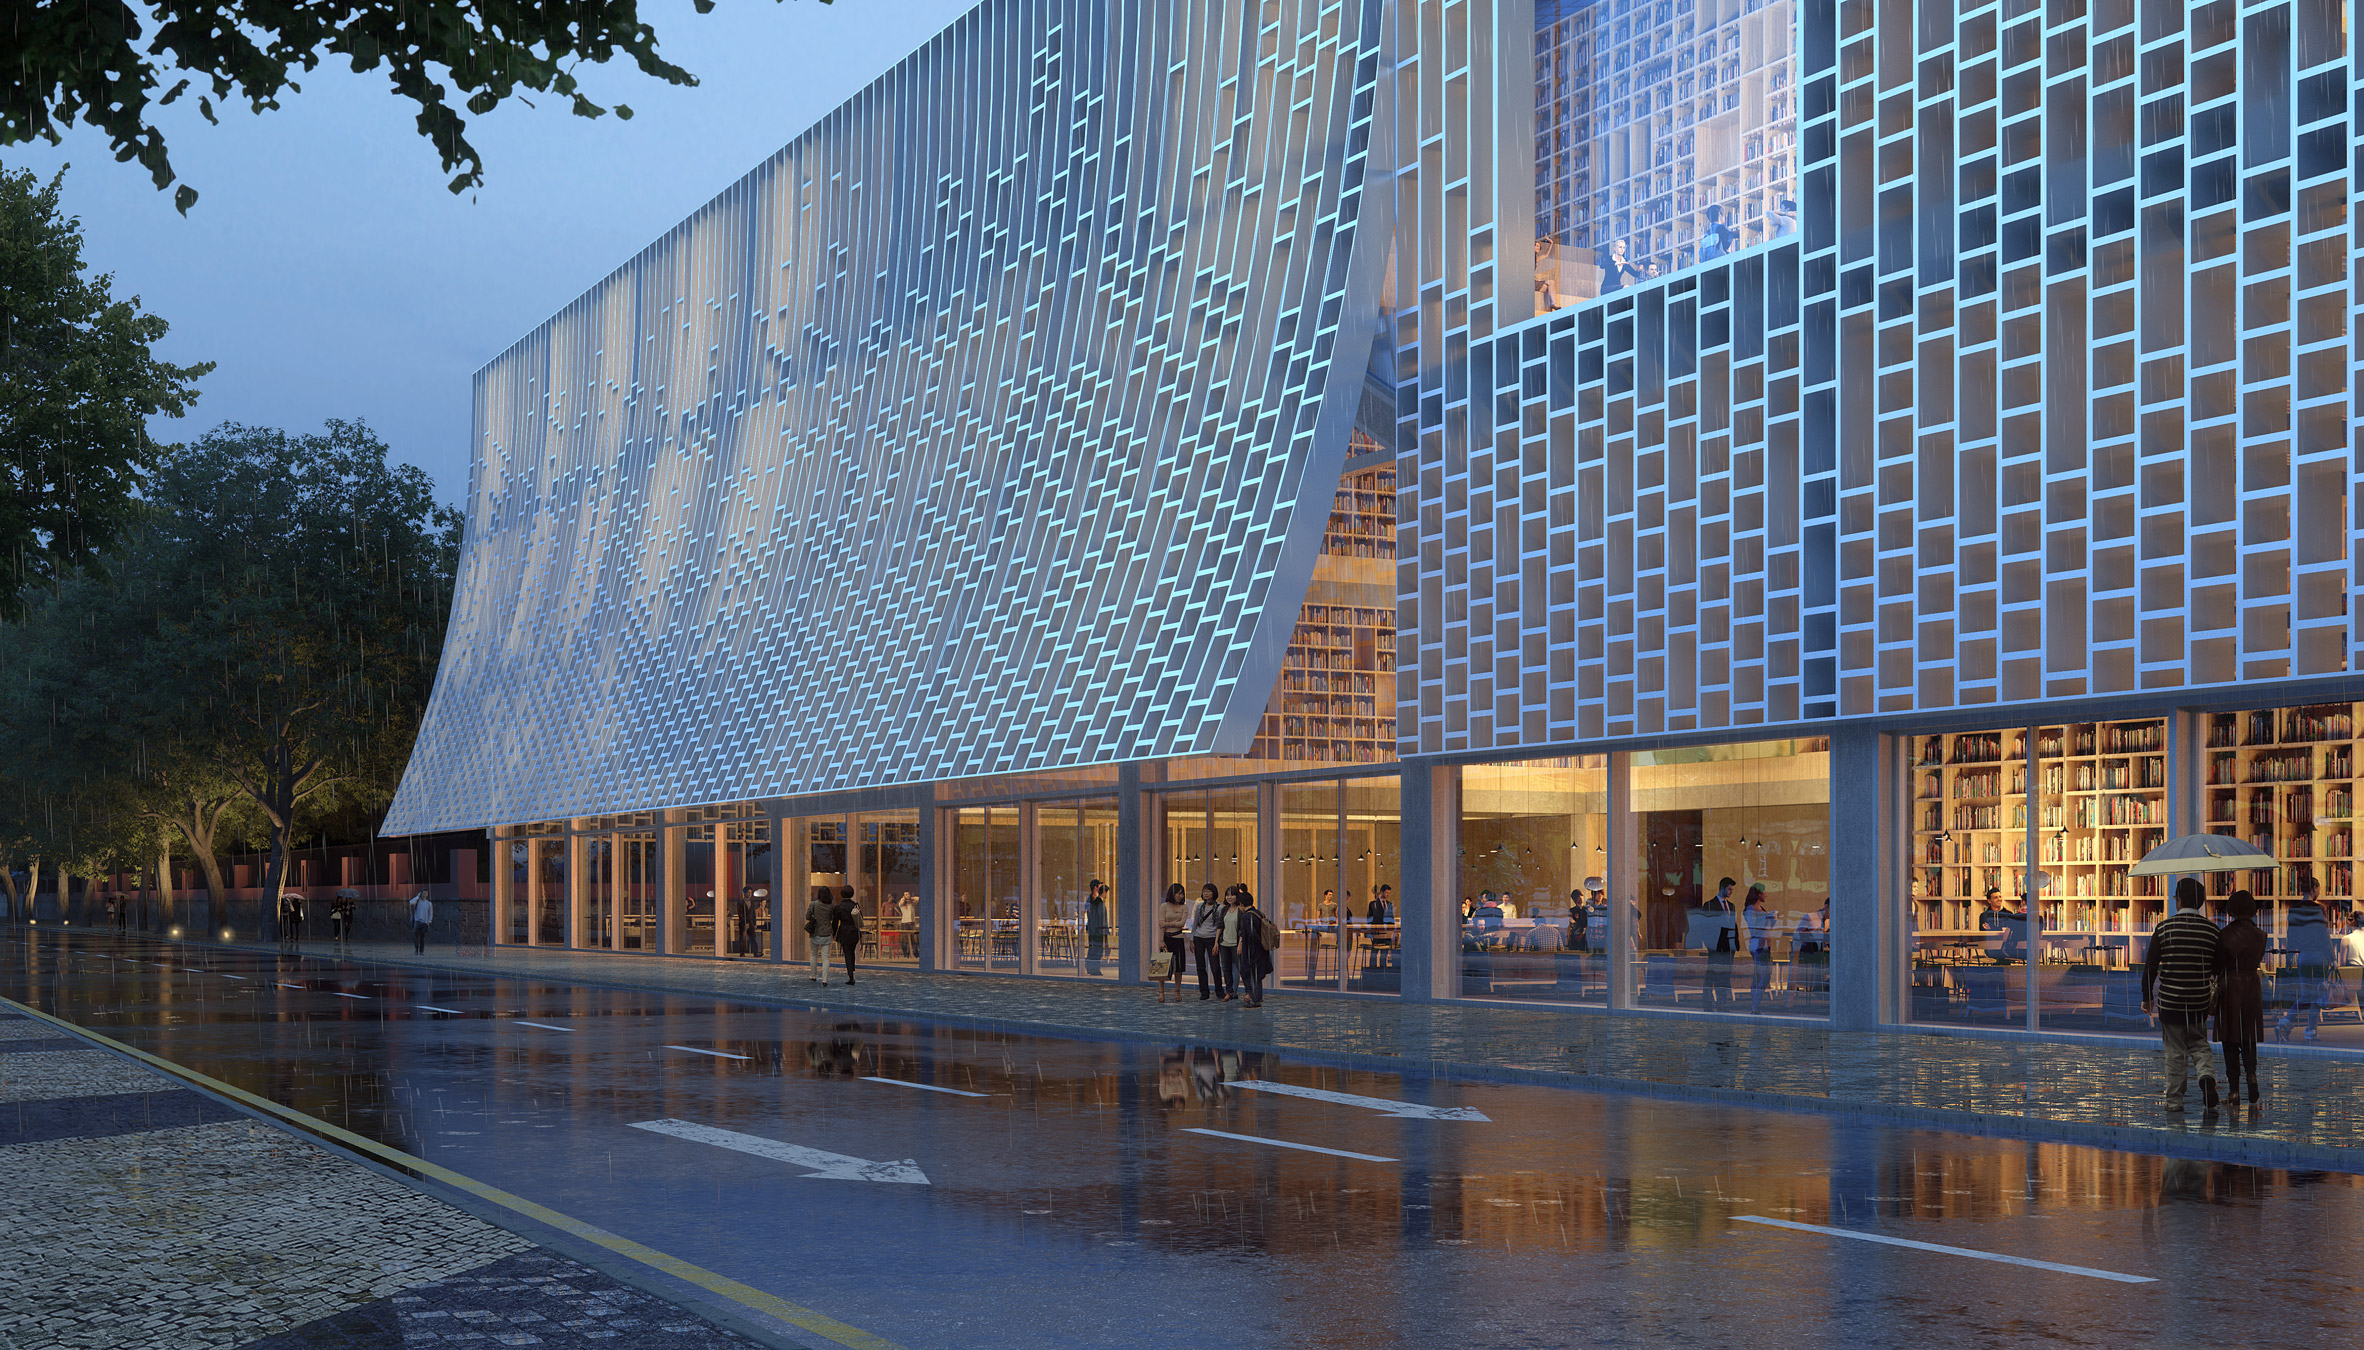 The facade is gridded and reflects bookcases by Mecanoo